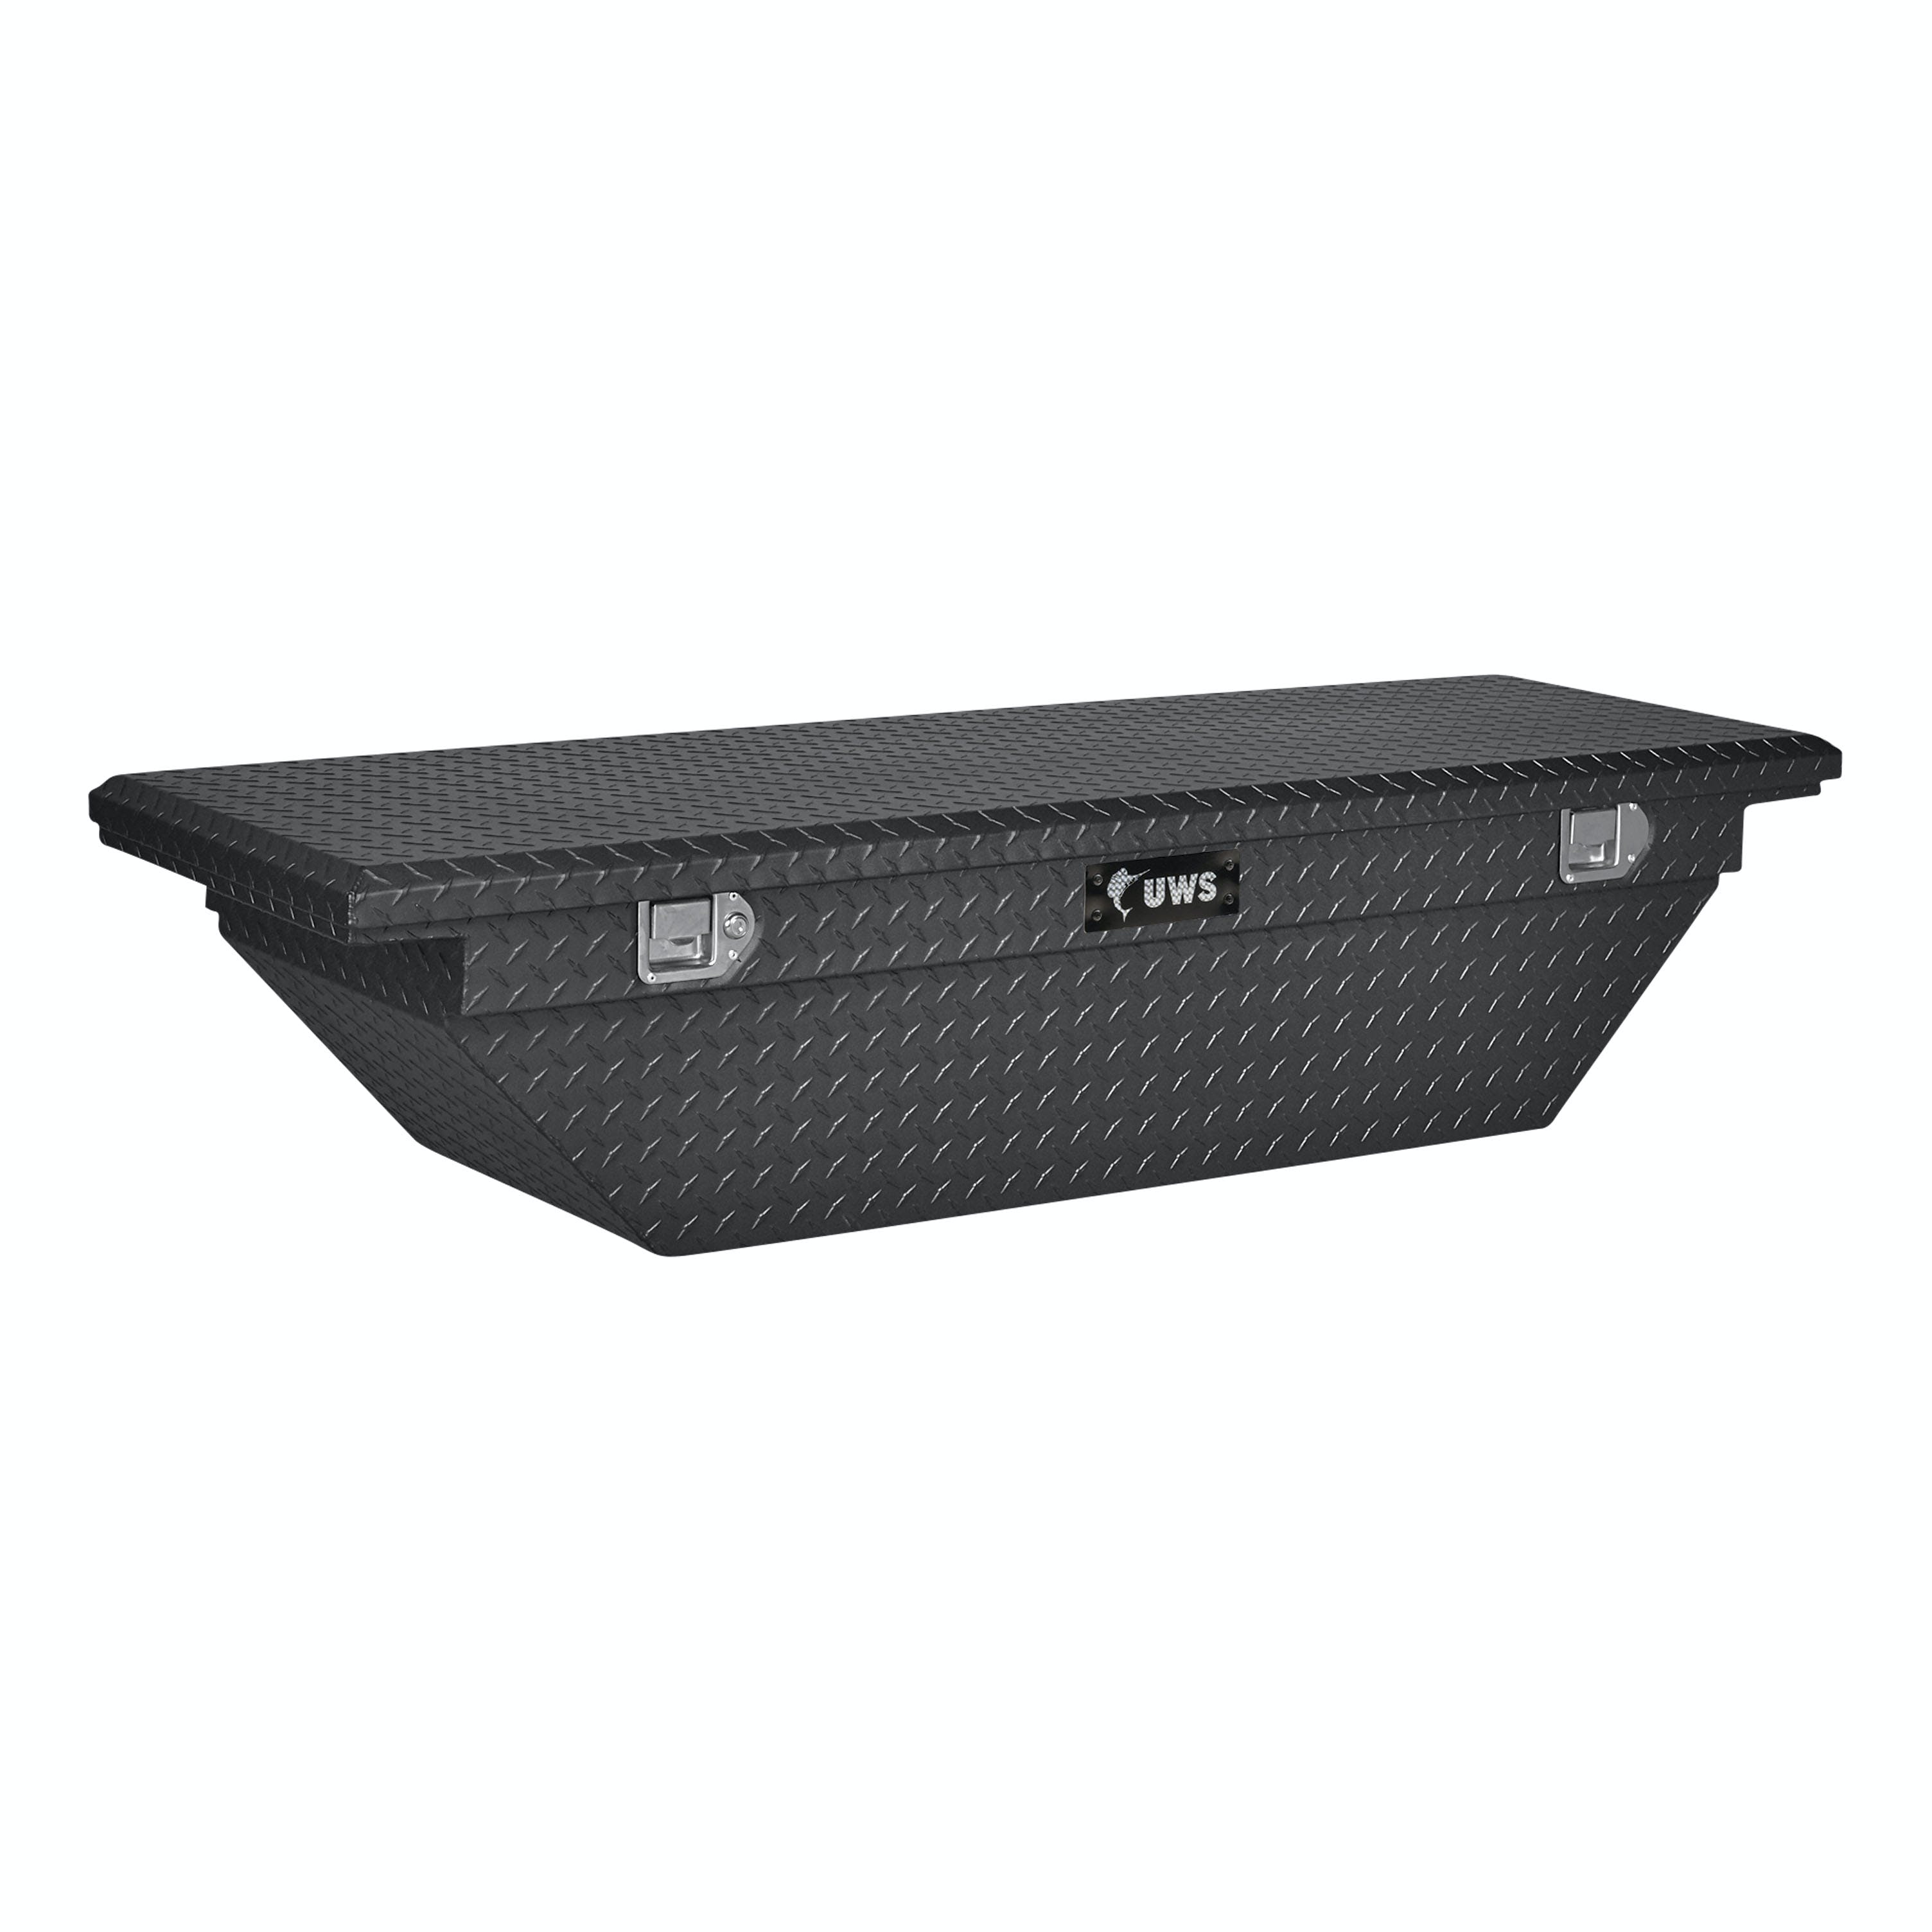 UWS TBS-63-A-LP-MB 63 inch Aluminum Single Lid Crossover Toolbox Low Profile Angled Matte Black